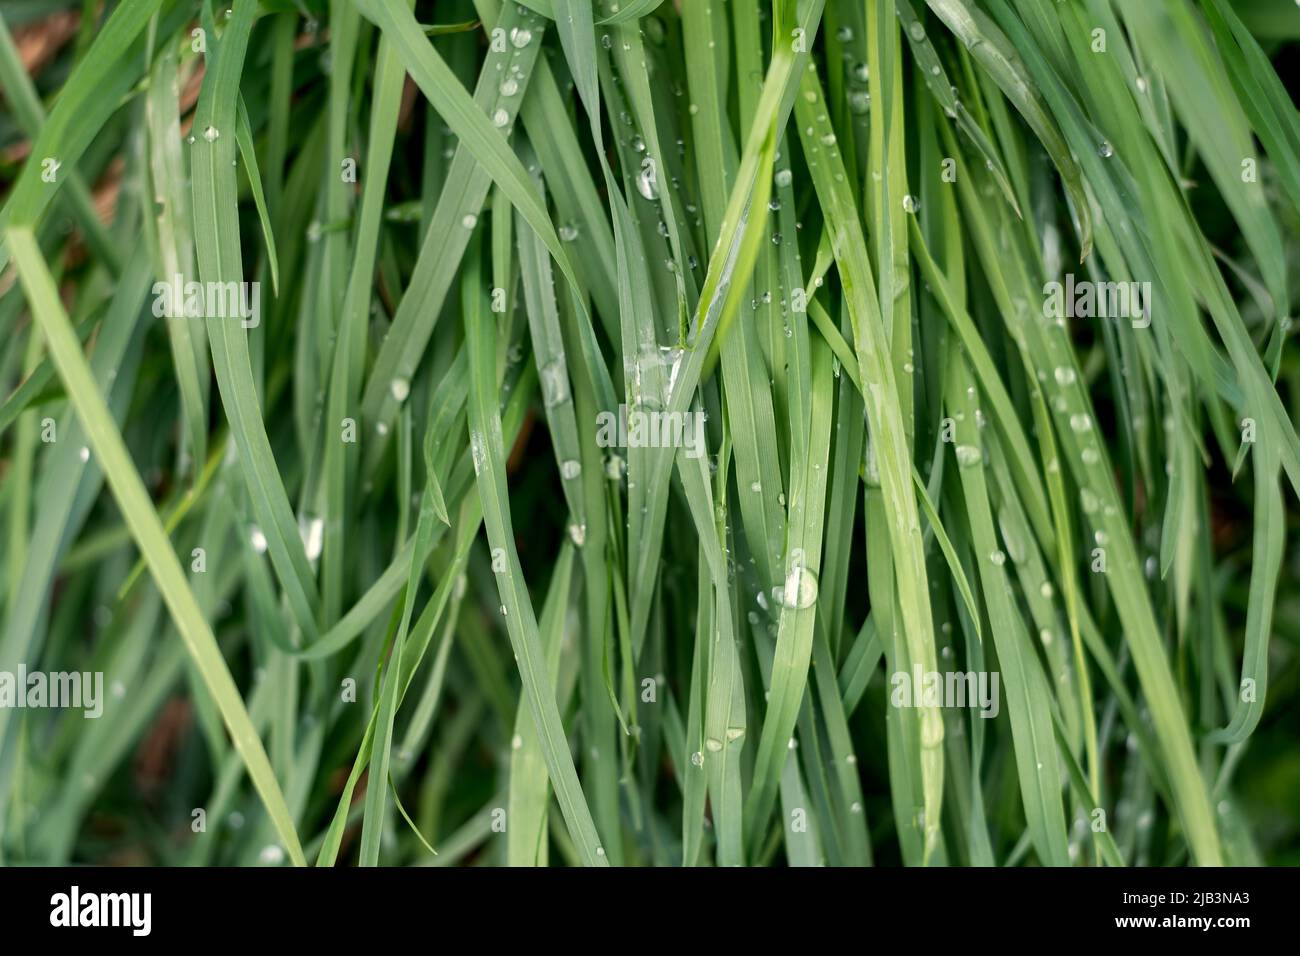 Natural green grass with water drops background, fresh lawn top view Stock Photo